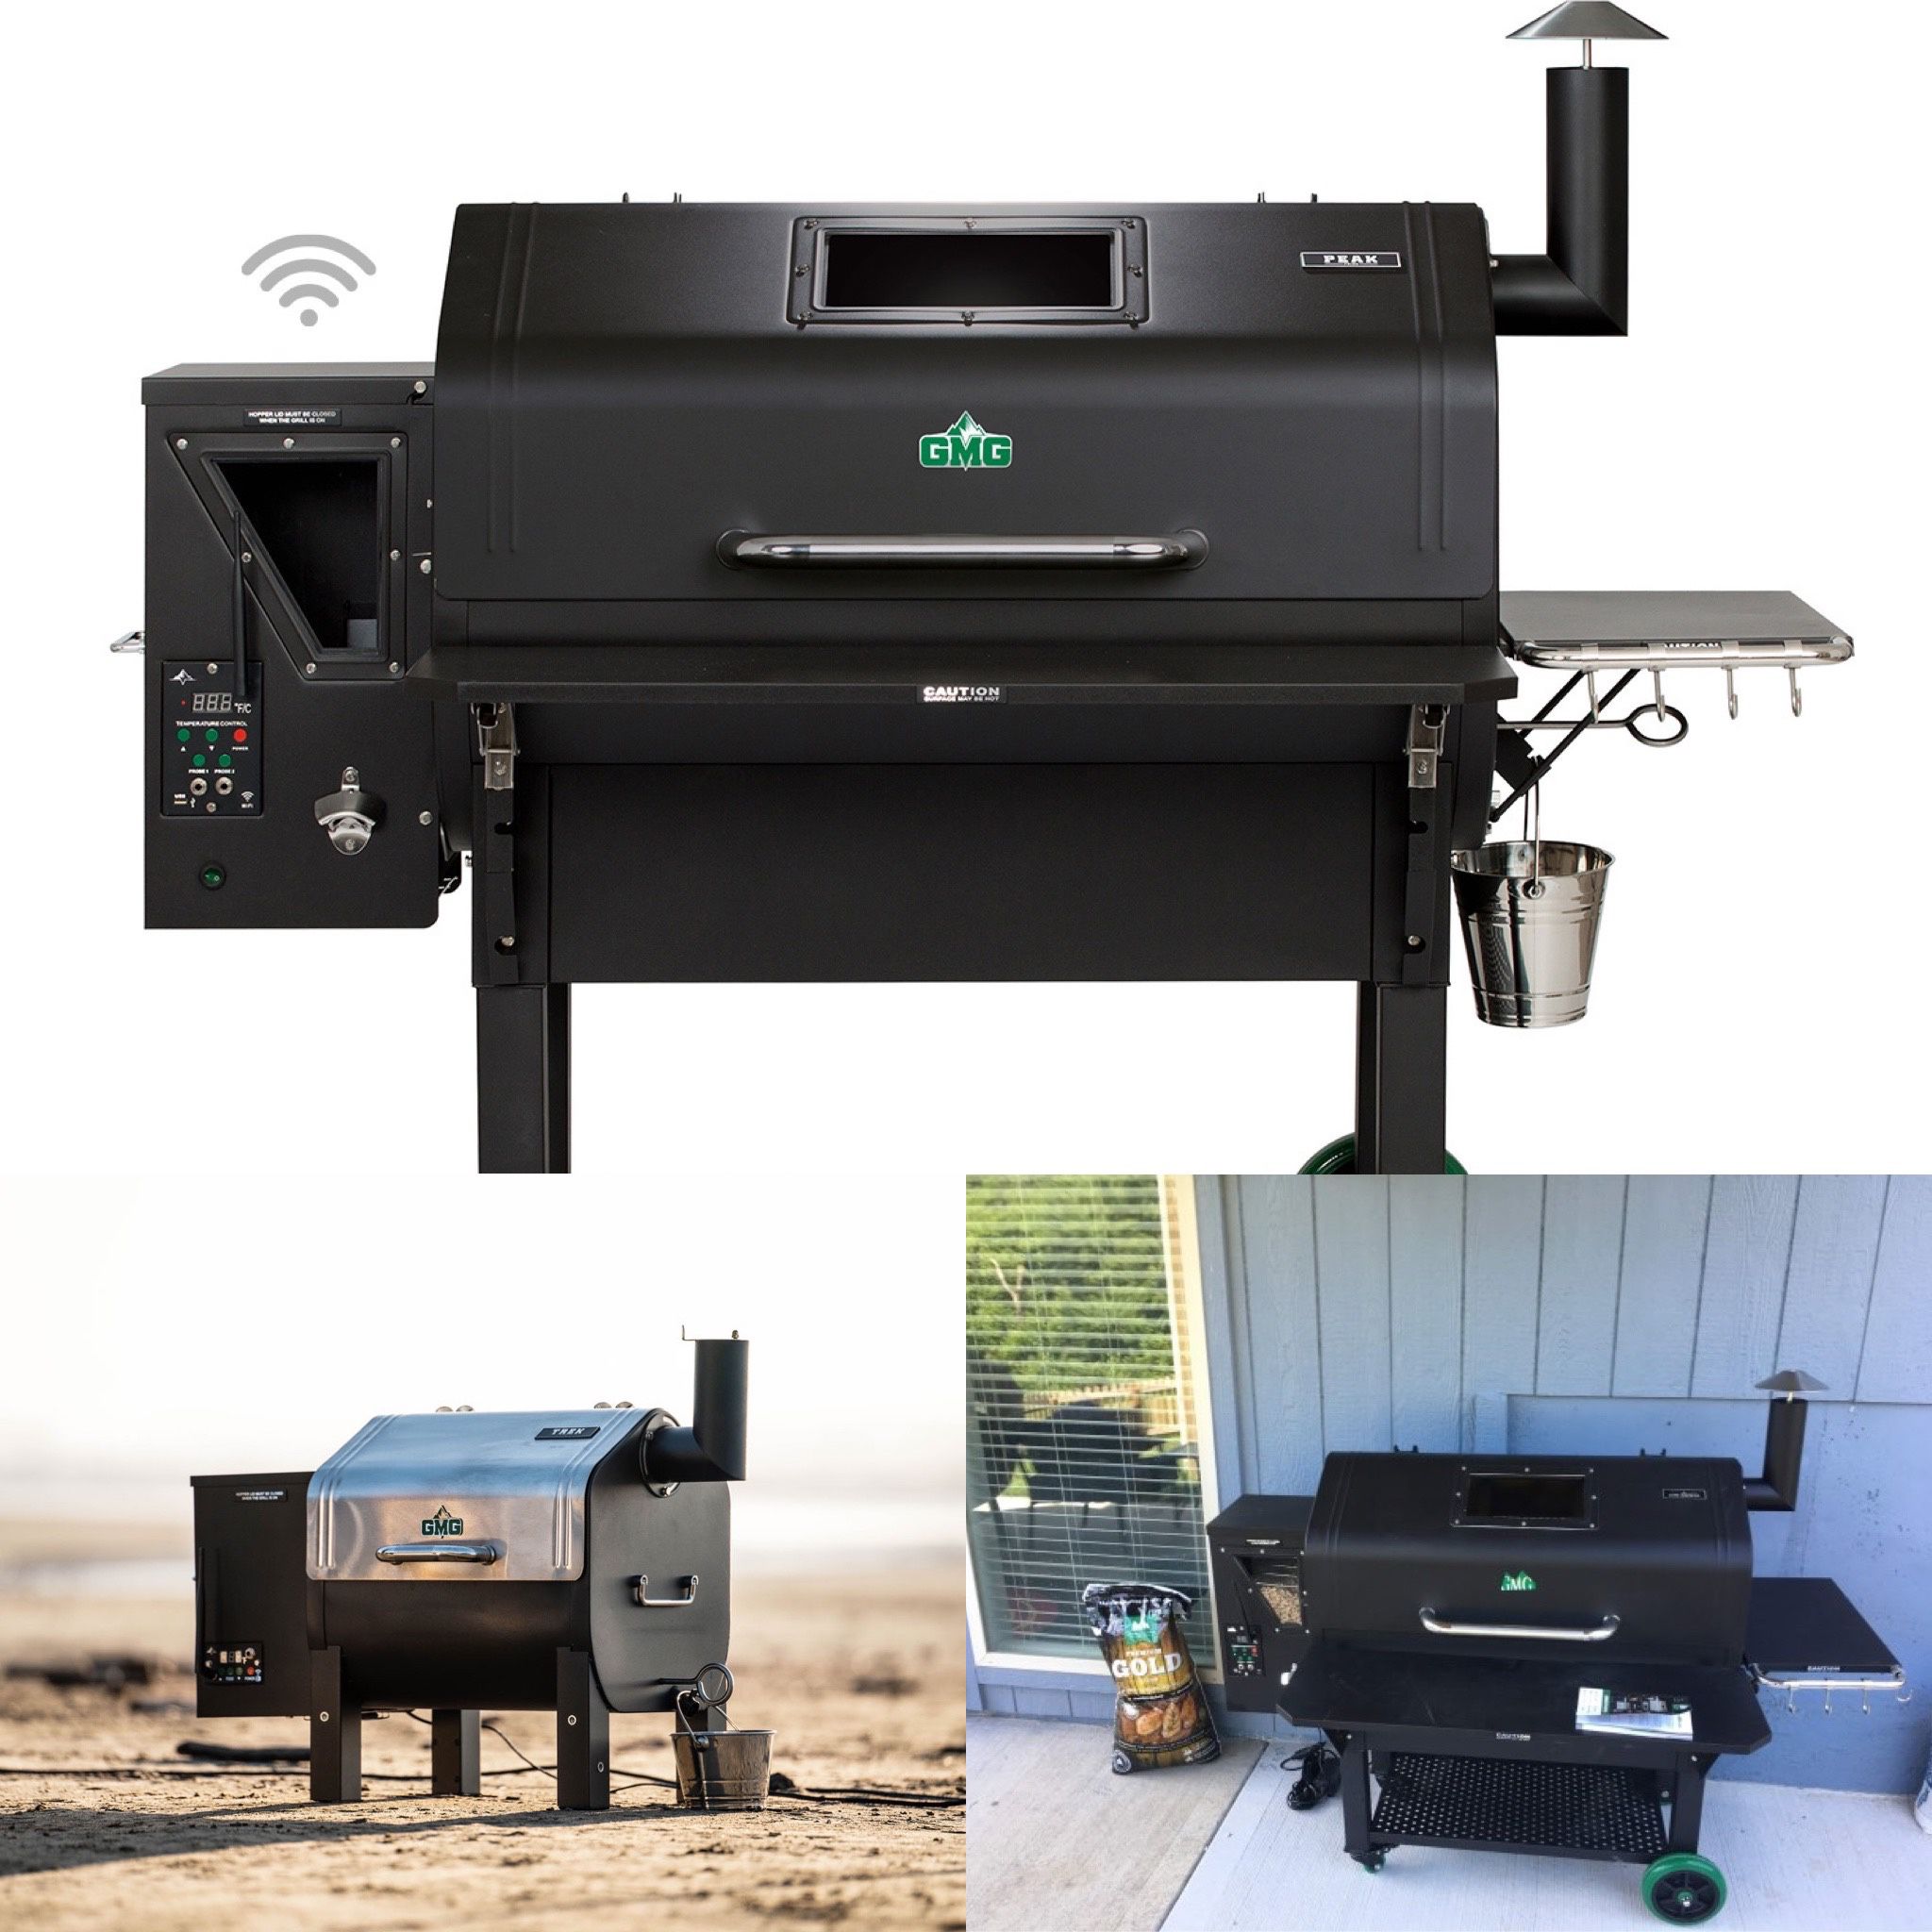 🥩 🍖 NEW!! Bakersfield BBQ Grill Space 🚛Delivery Available Wood Pellet Green Mountain BBQ Grills STILL IN BOX!! 📦🍖🥩